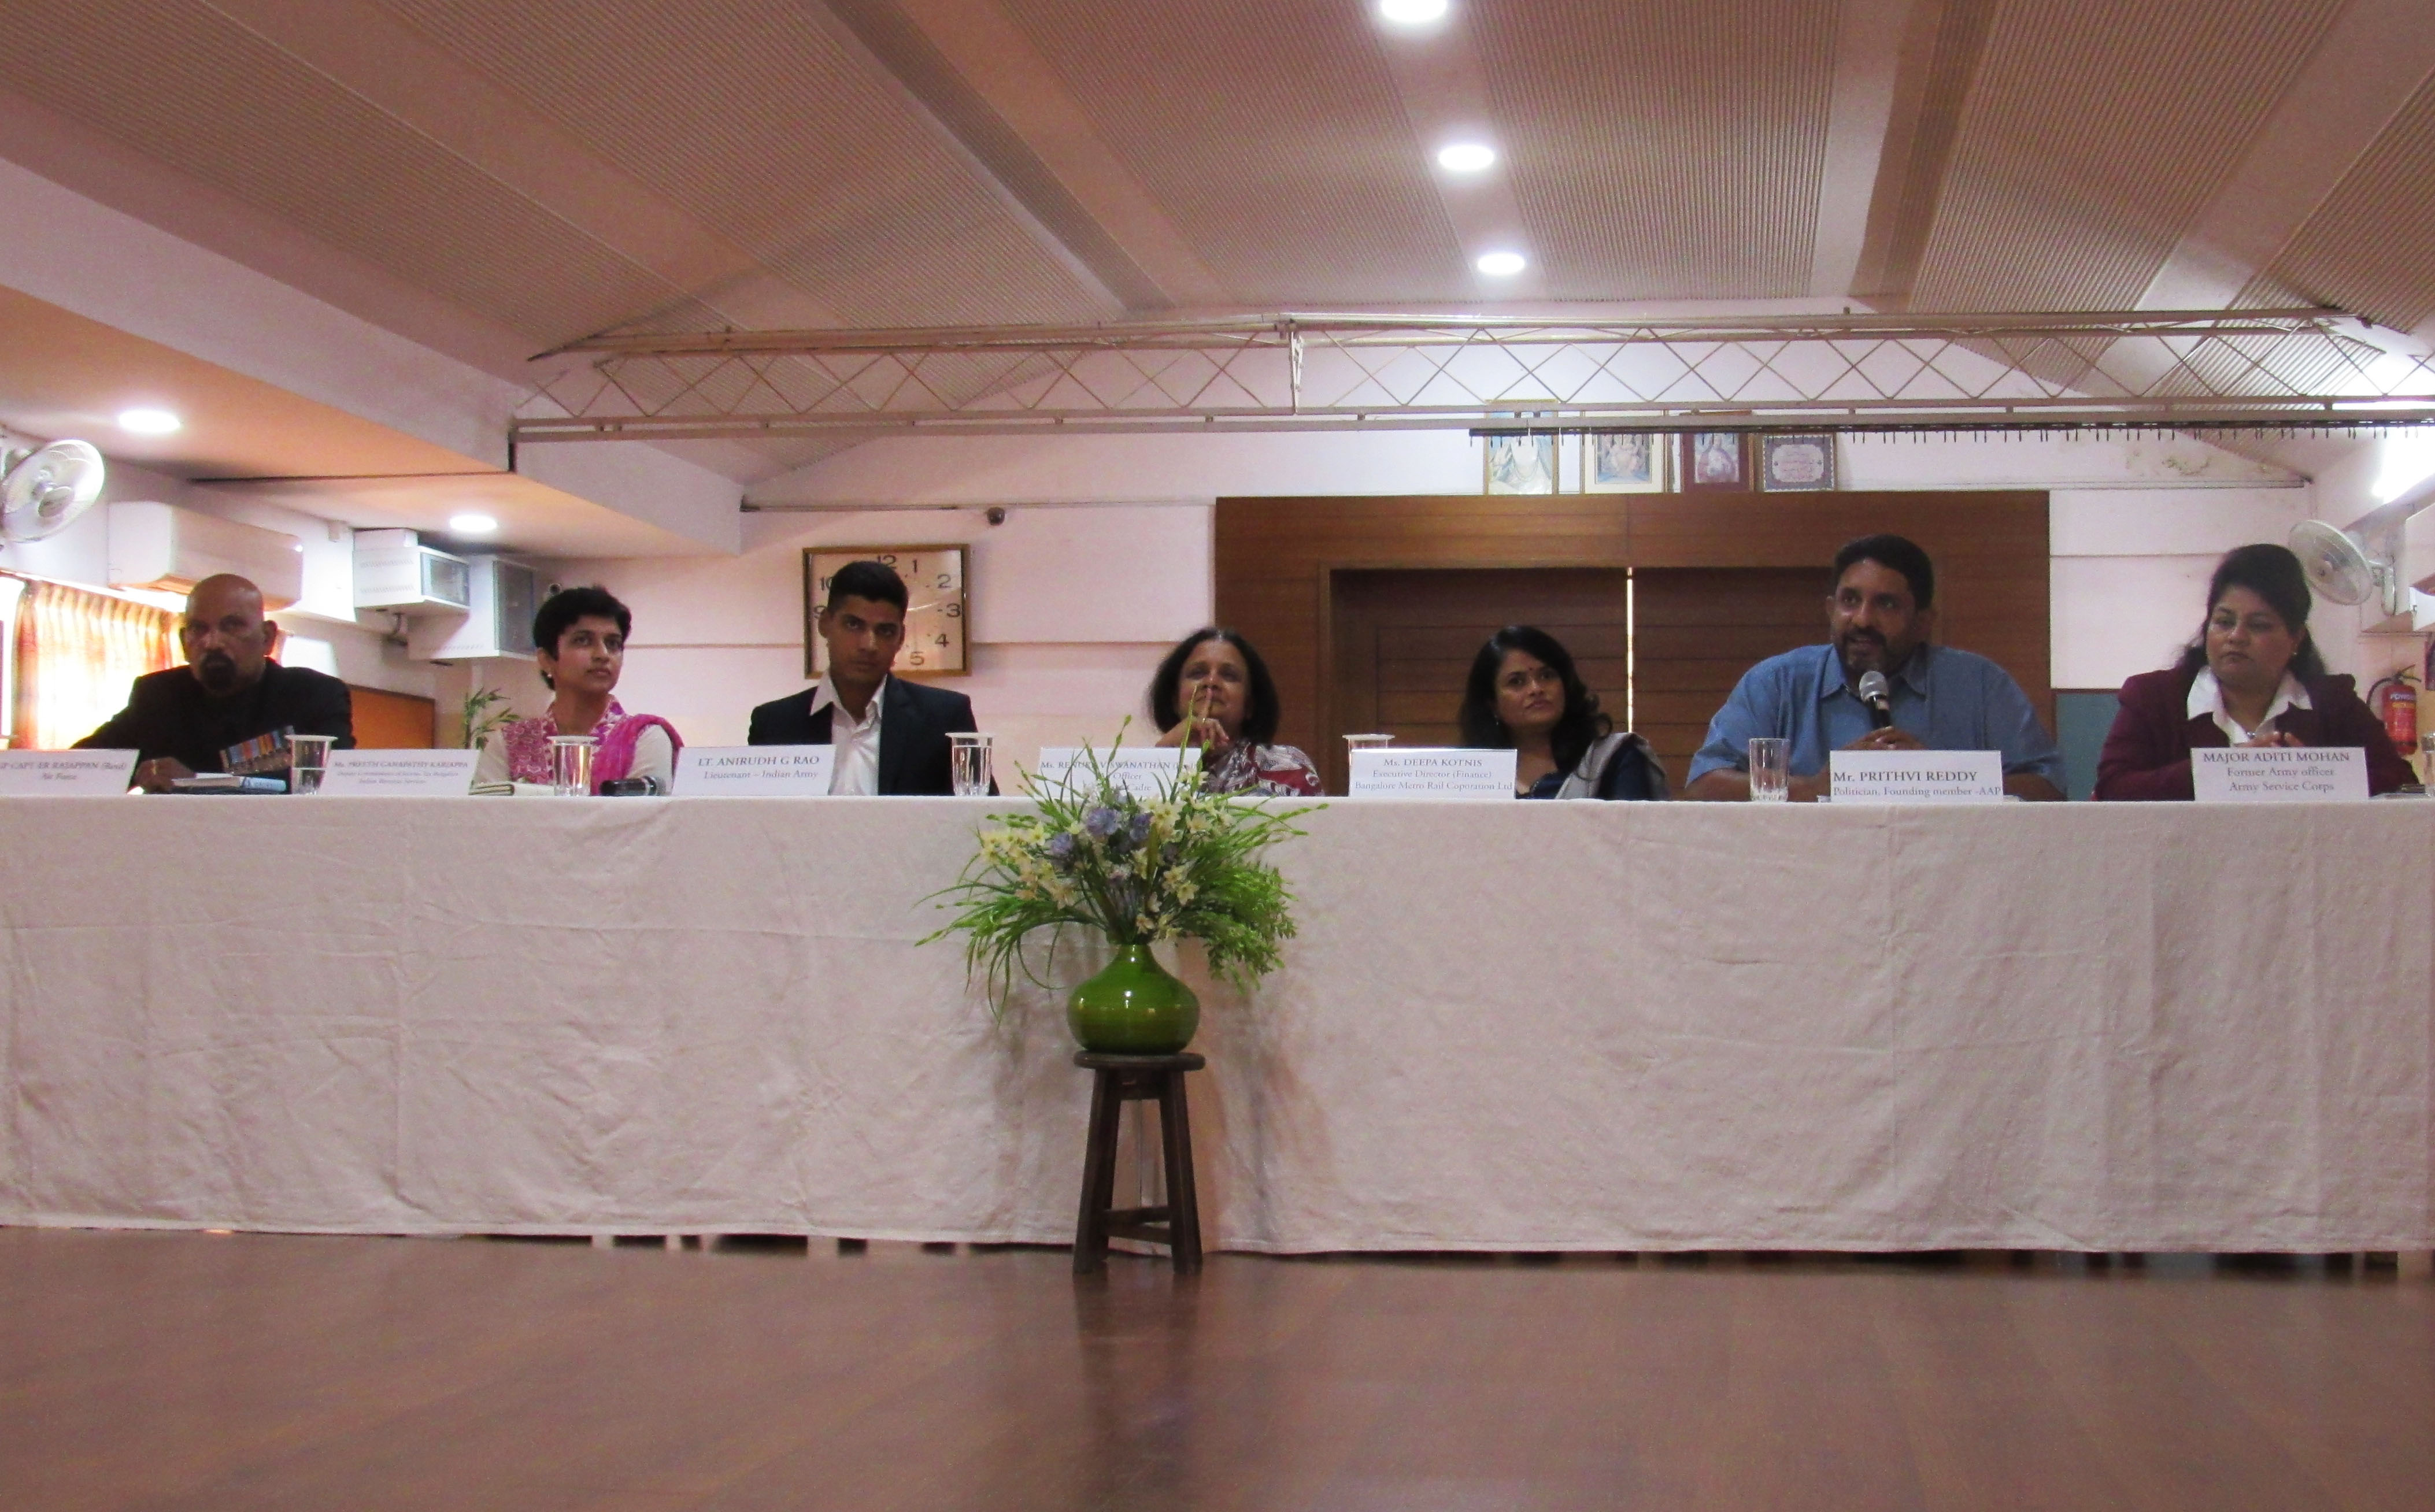 Career Panel  - Government Services  - by Renuka Vishwanathan - Rtd IAS Officer, Karnataka Cadre, Deepa Kotnis - Executive Director (Finance) BMRCL, Lt. Anirudh G Rao (Indian Army), Preeth Ganapathy Kariappa - Deputy Commissioner of Income Tax, GP Capt ER Rajappan (Retd), Major Aditi Mohan - Former Army Officer (Army Service Corps)